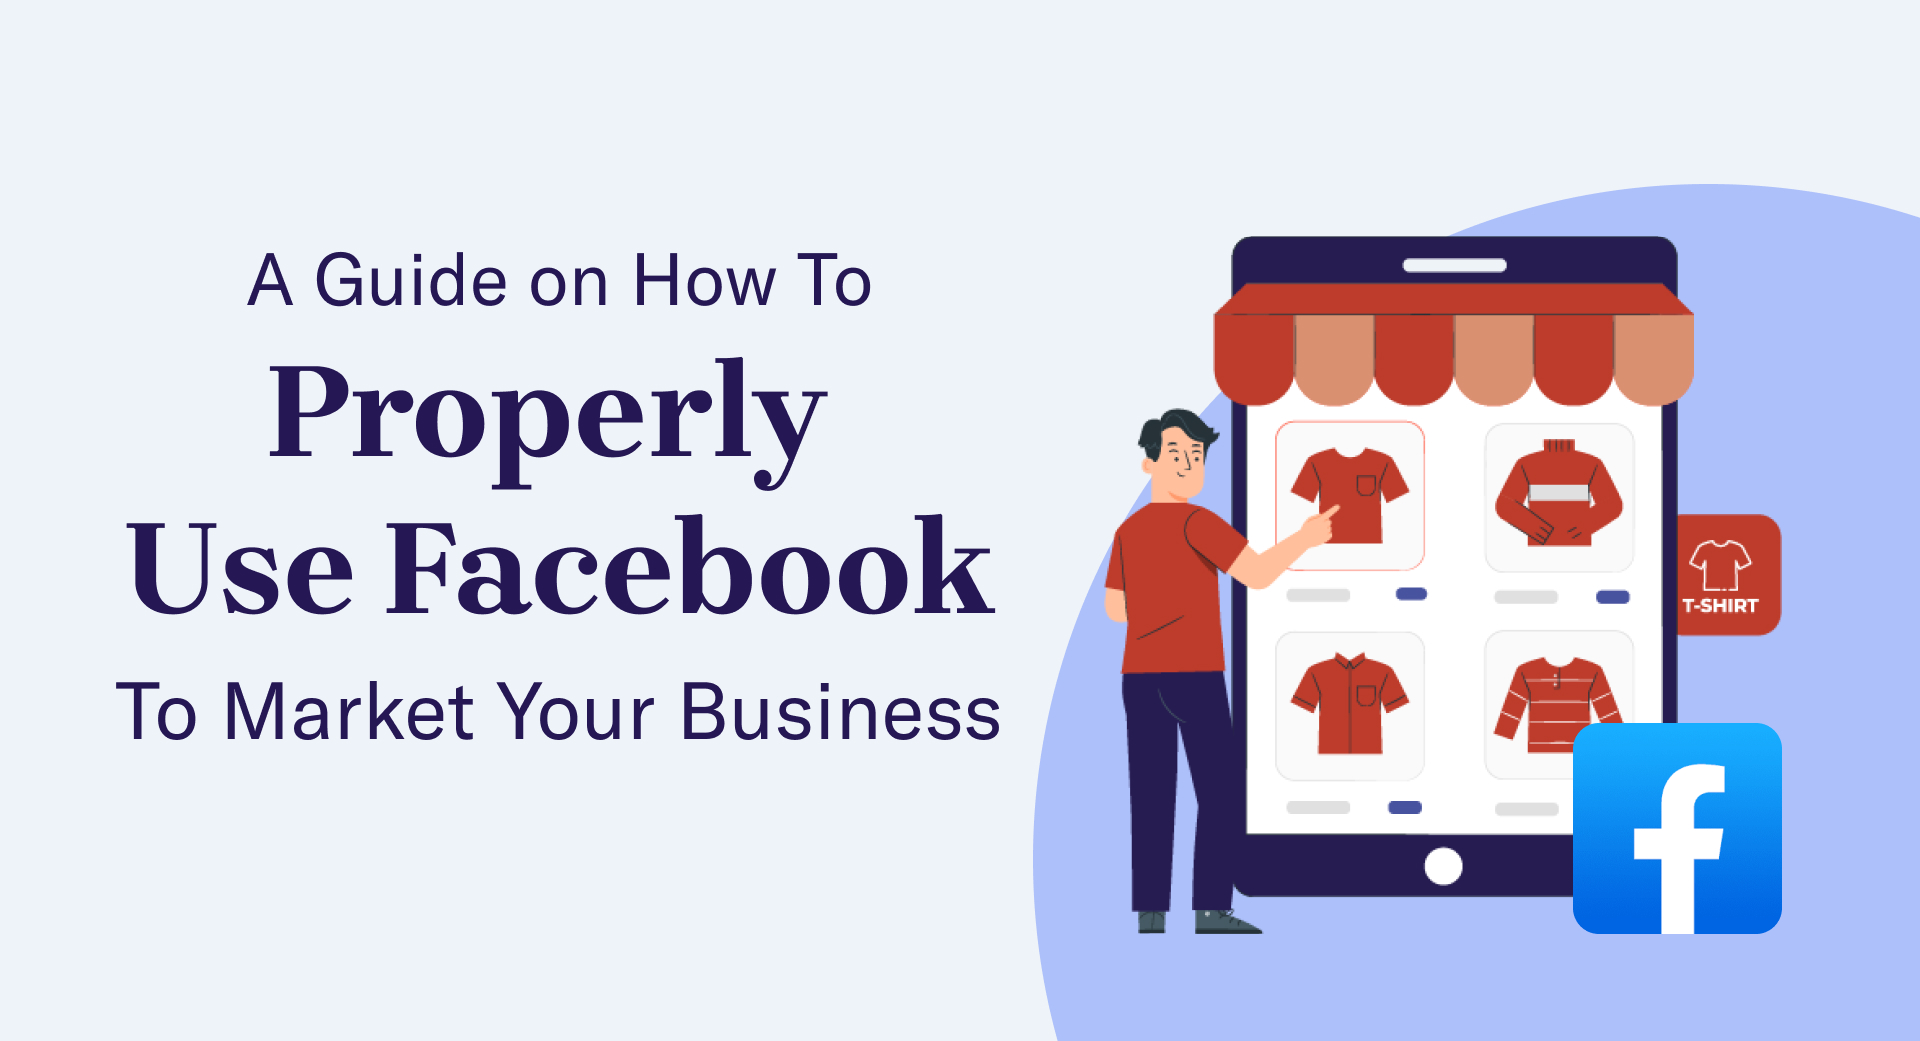 A-Guide-on-How-To-Properly-Use-Facebook-To-Market-Your-Business